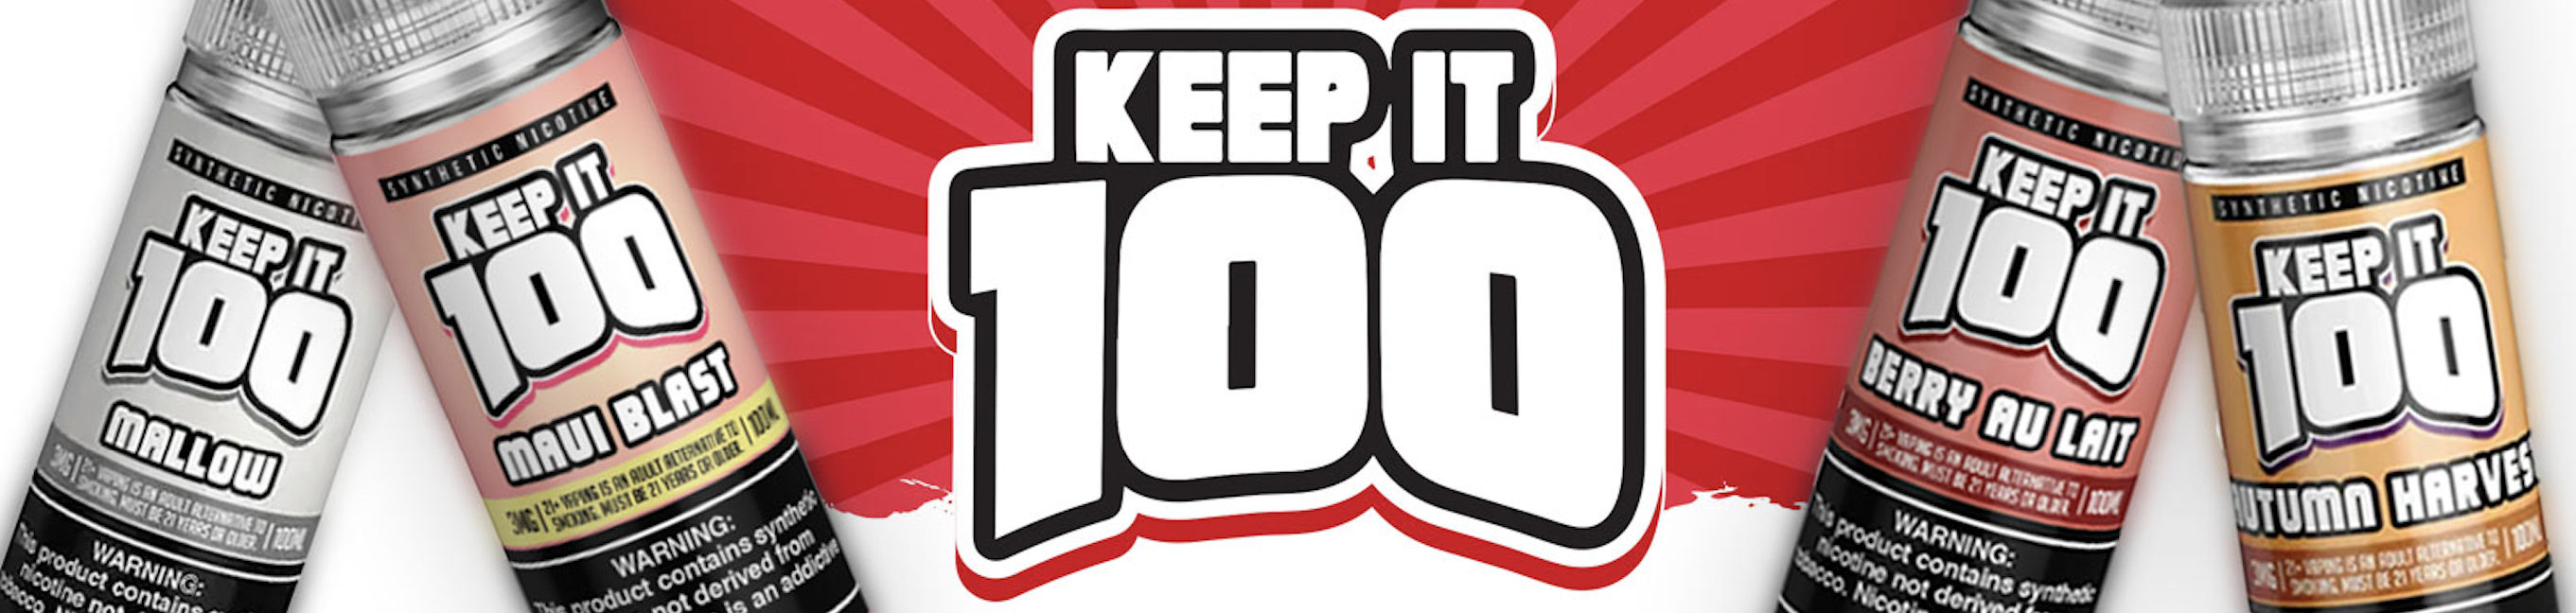 Keep it 100 e-juice at the lowest price online